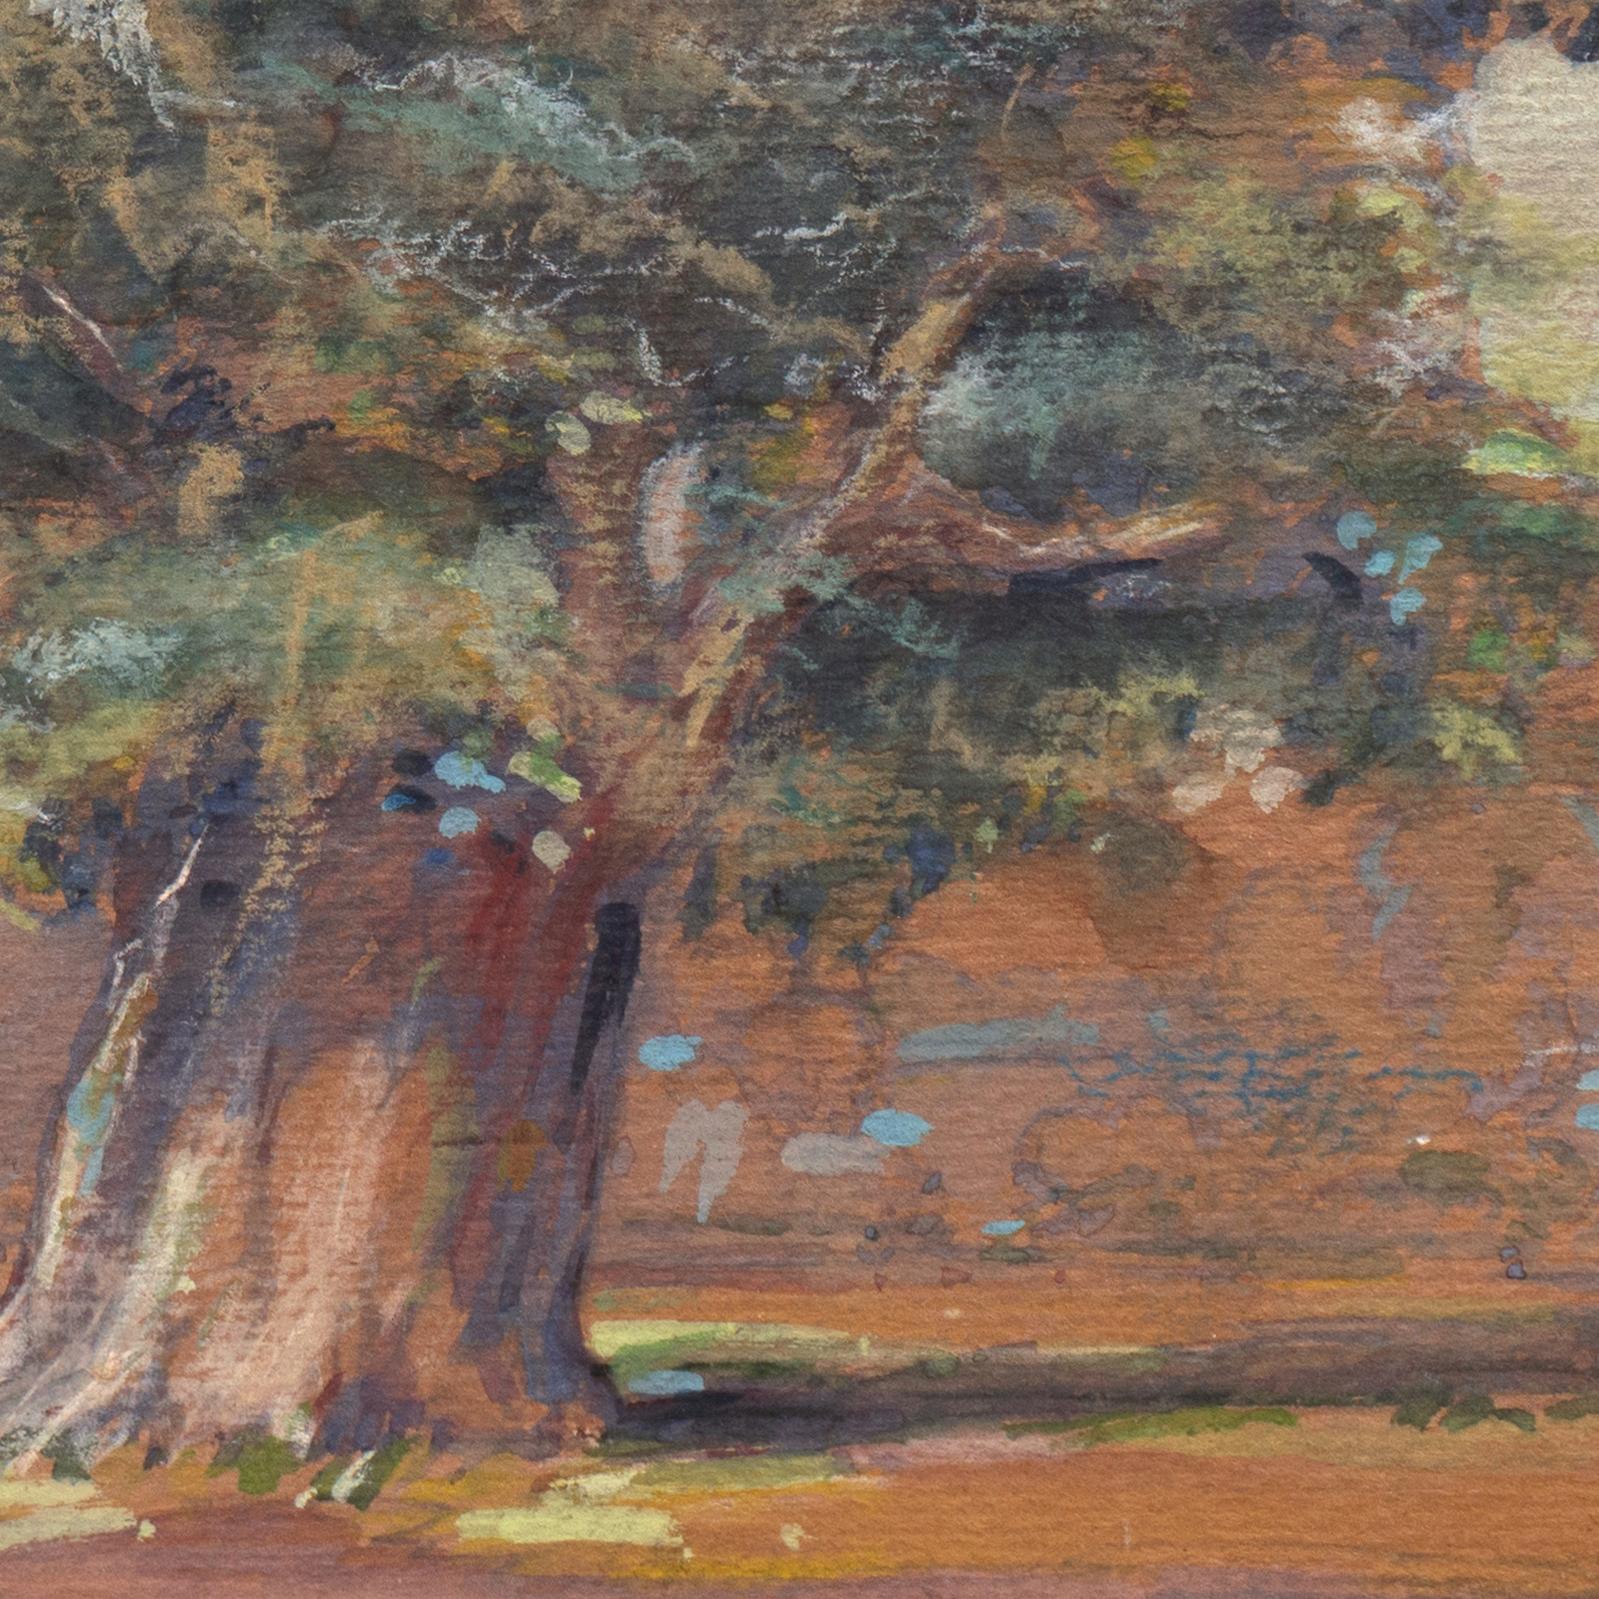 Signed lower right, 'Laurence Bell' (British, died 1916) and painted circa 1910.

Bell studied at the Bushey School of Art in Hertfordshire in England. His preferred subject was landscapes, often with detailed studies of trees. He was also an